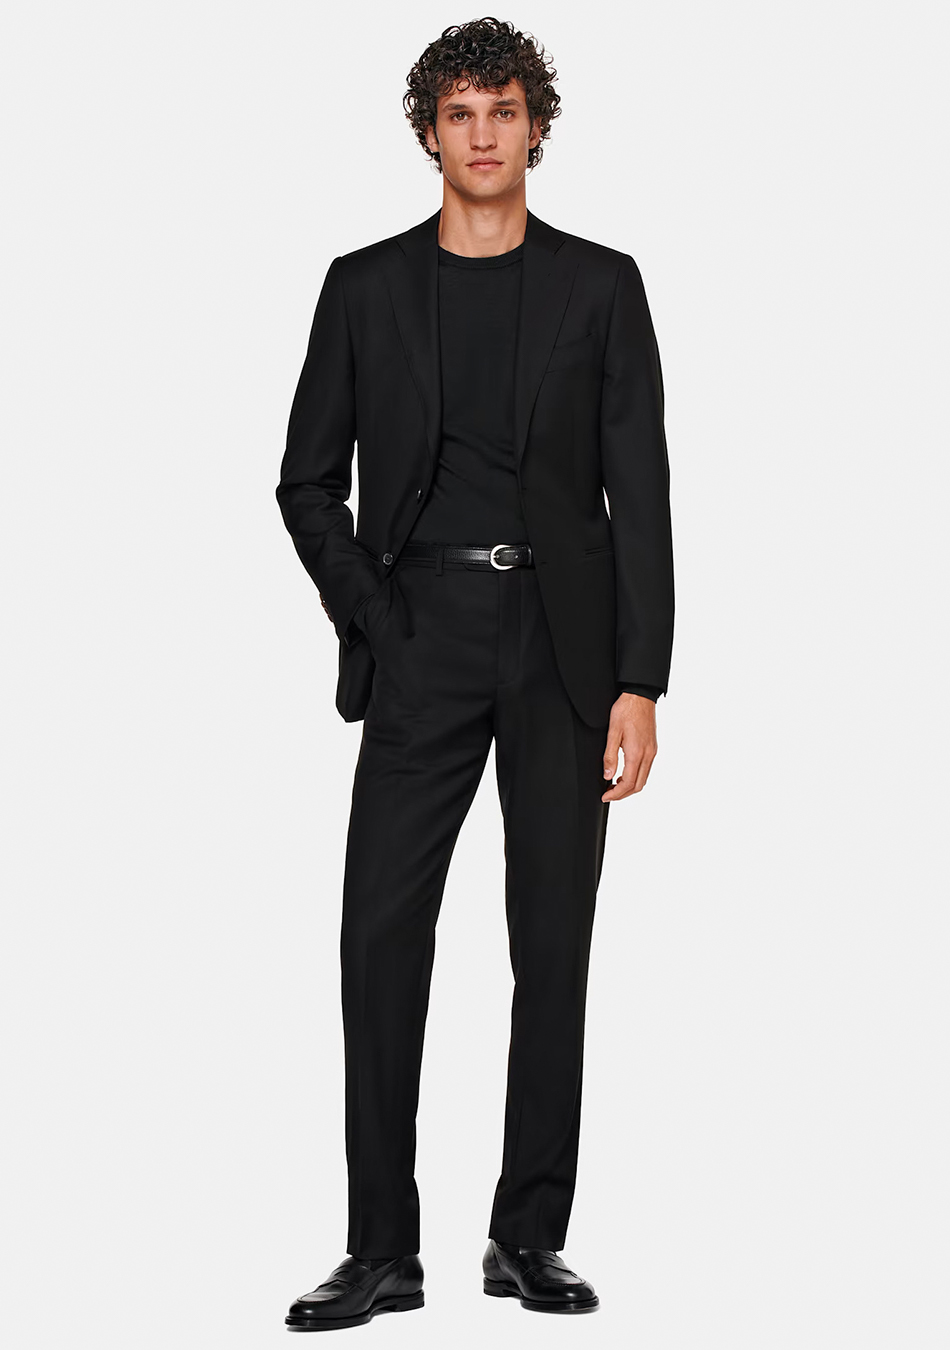 Black suit, black crew neck t-shirt, and black loafers